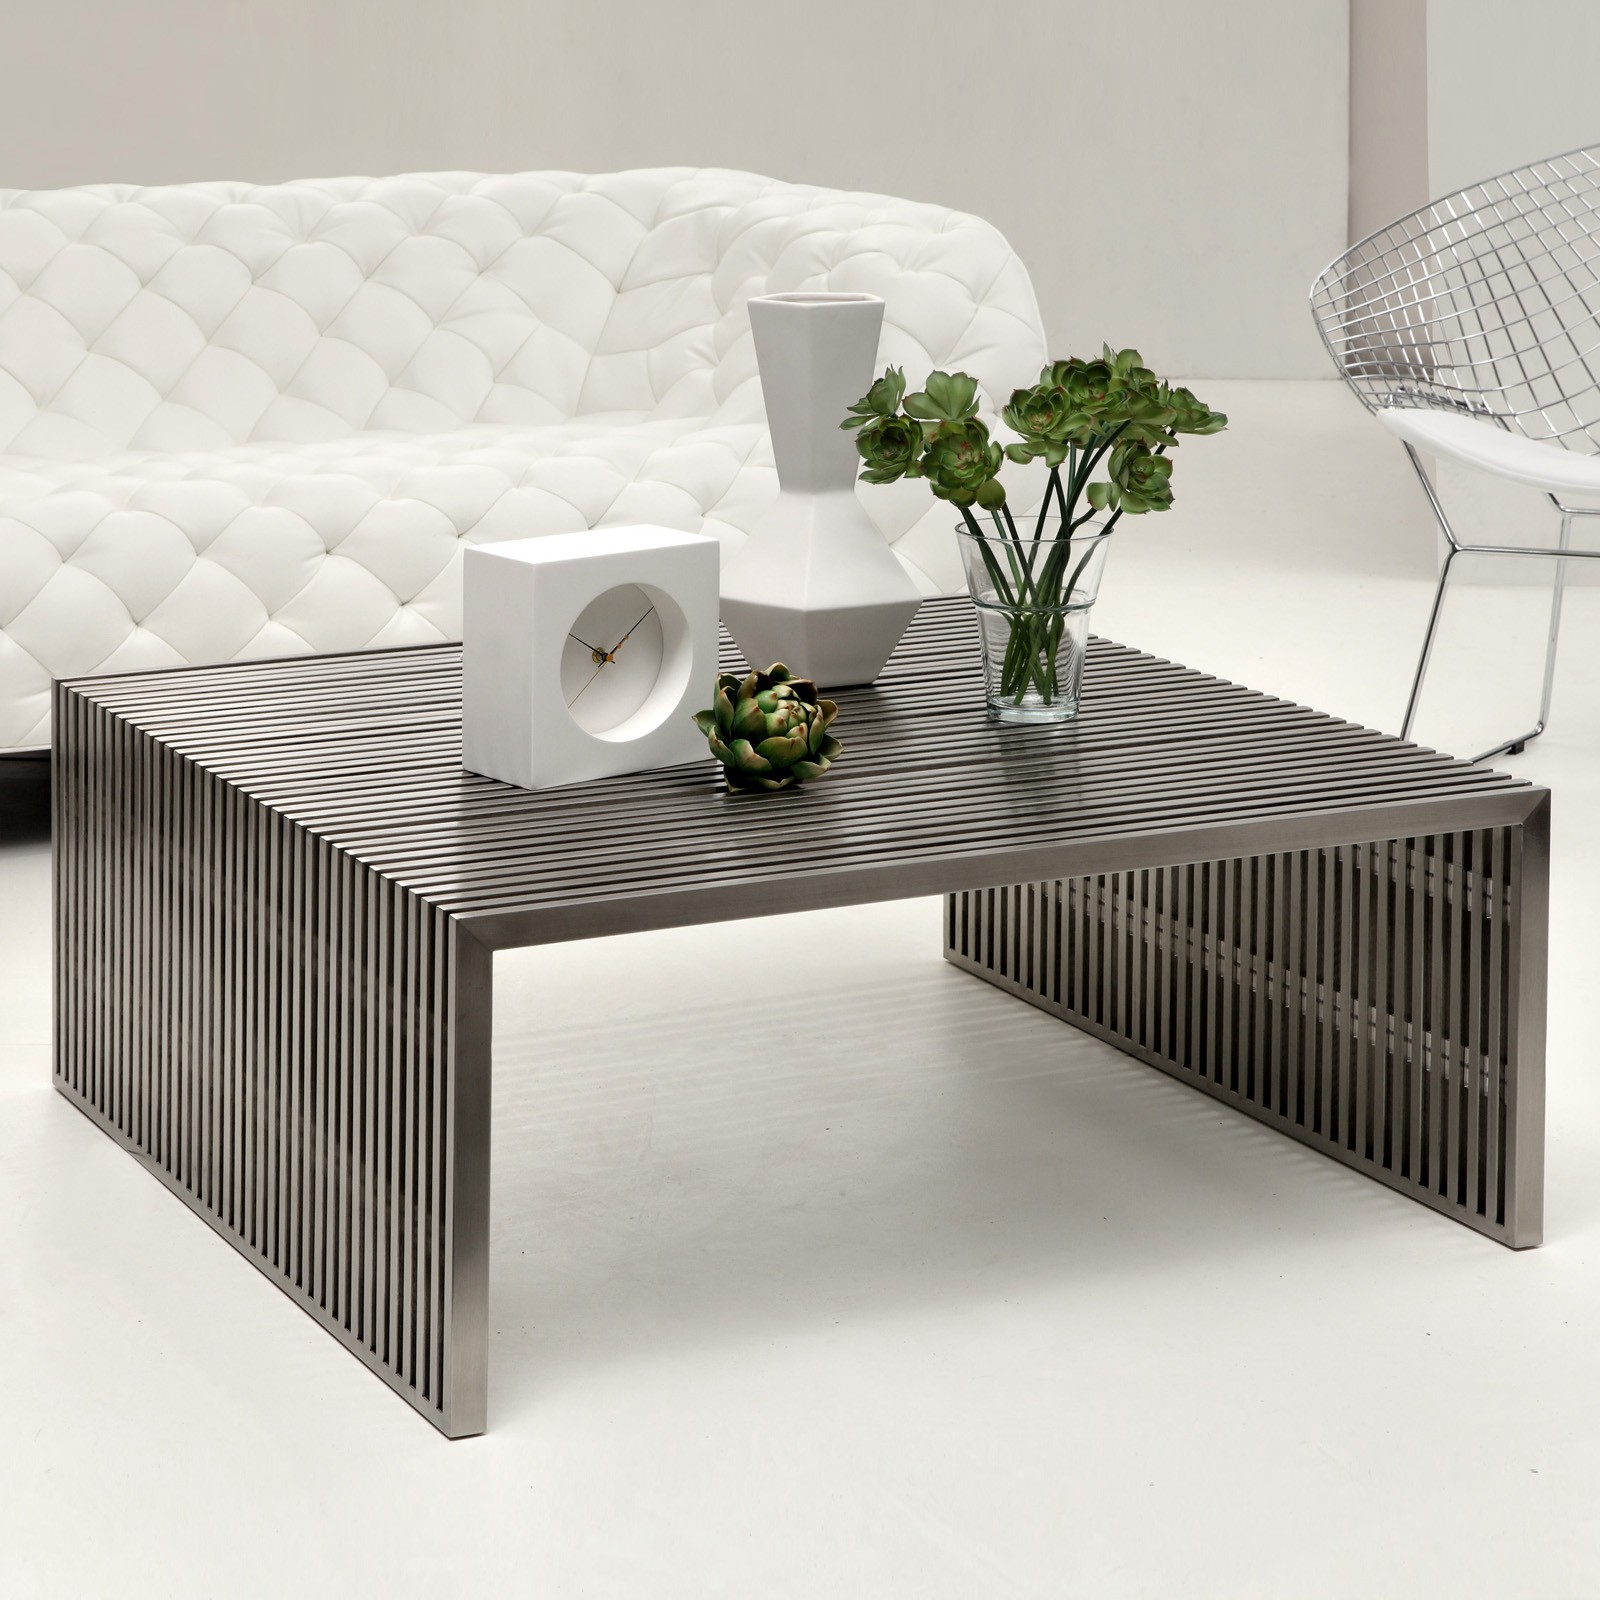 Zuo modern square coffee table coffee tables at hayneedle